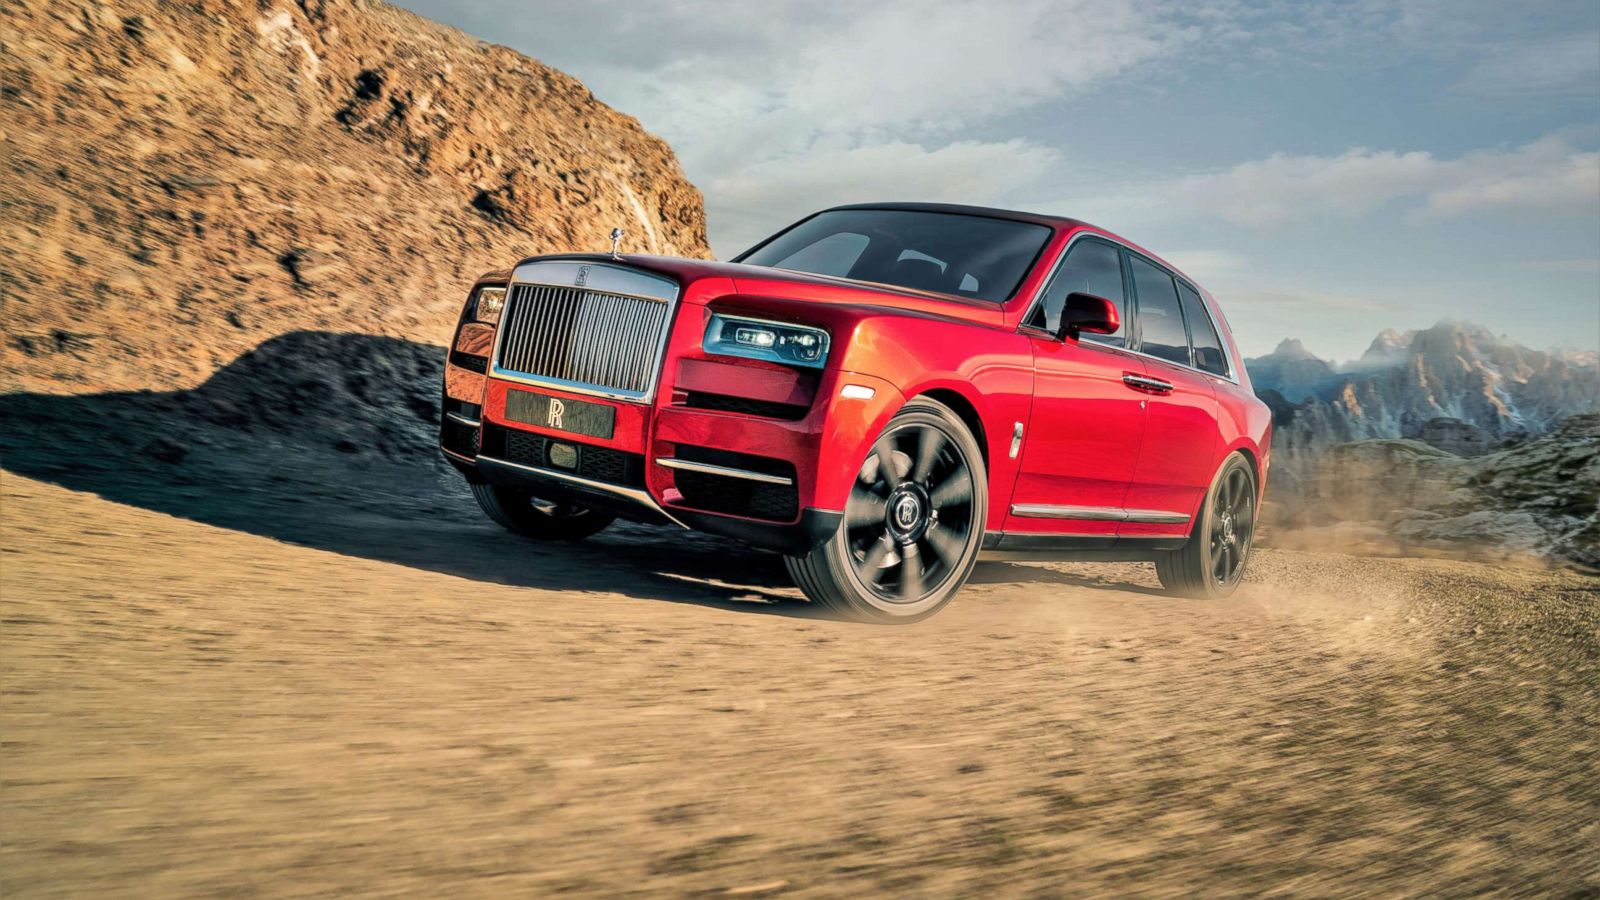 Rolls-Royce Cullinan, A Supremely Luxurious SUV - BILLIONAIRE Asia